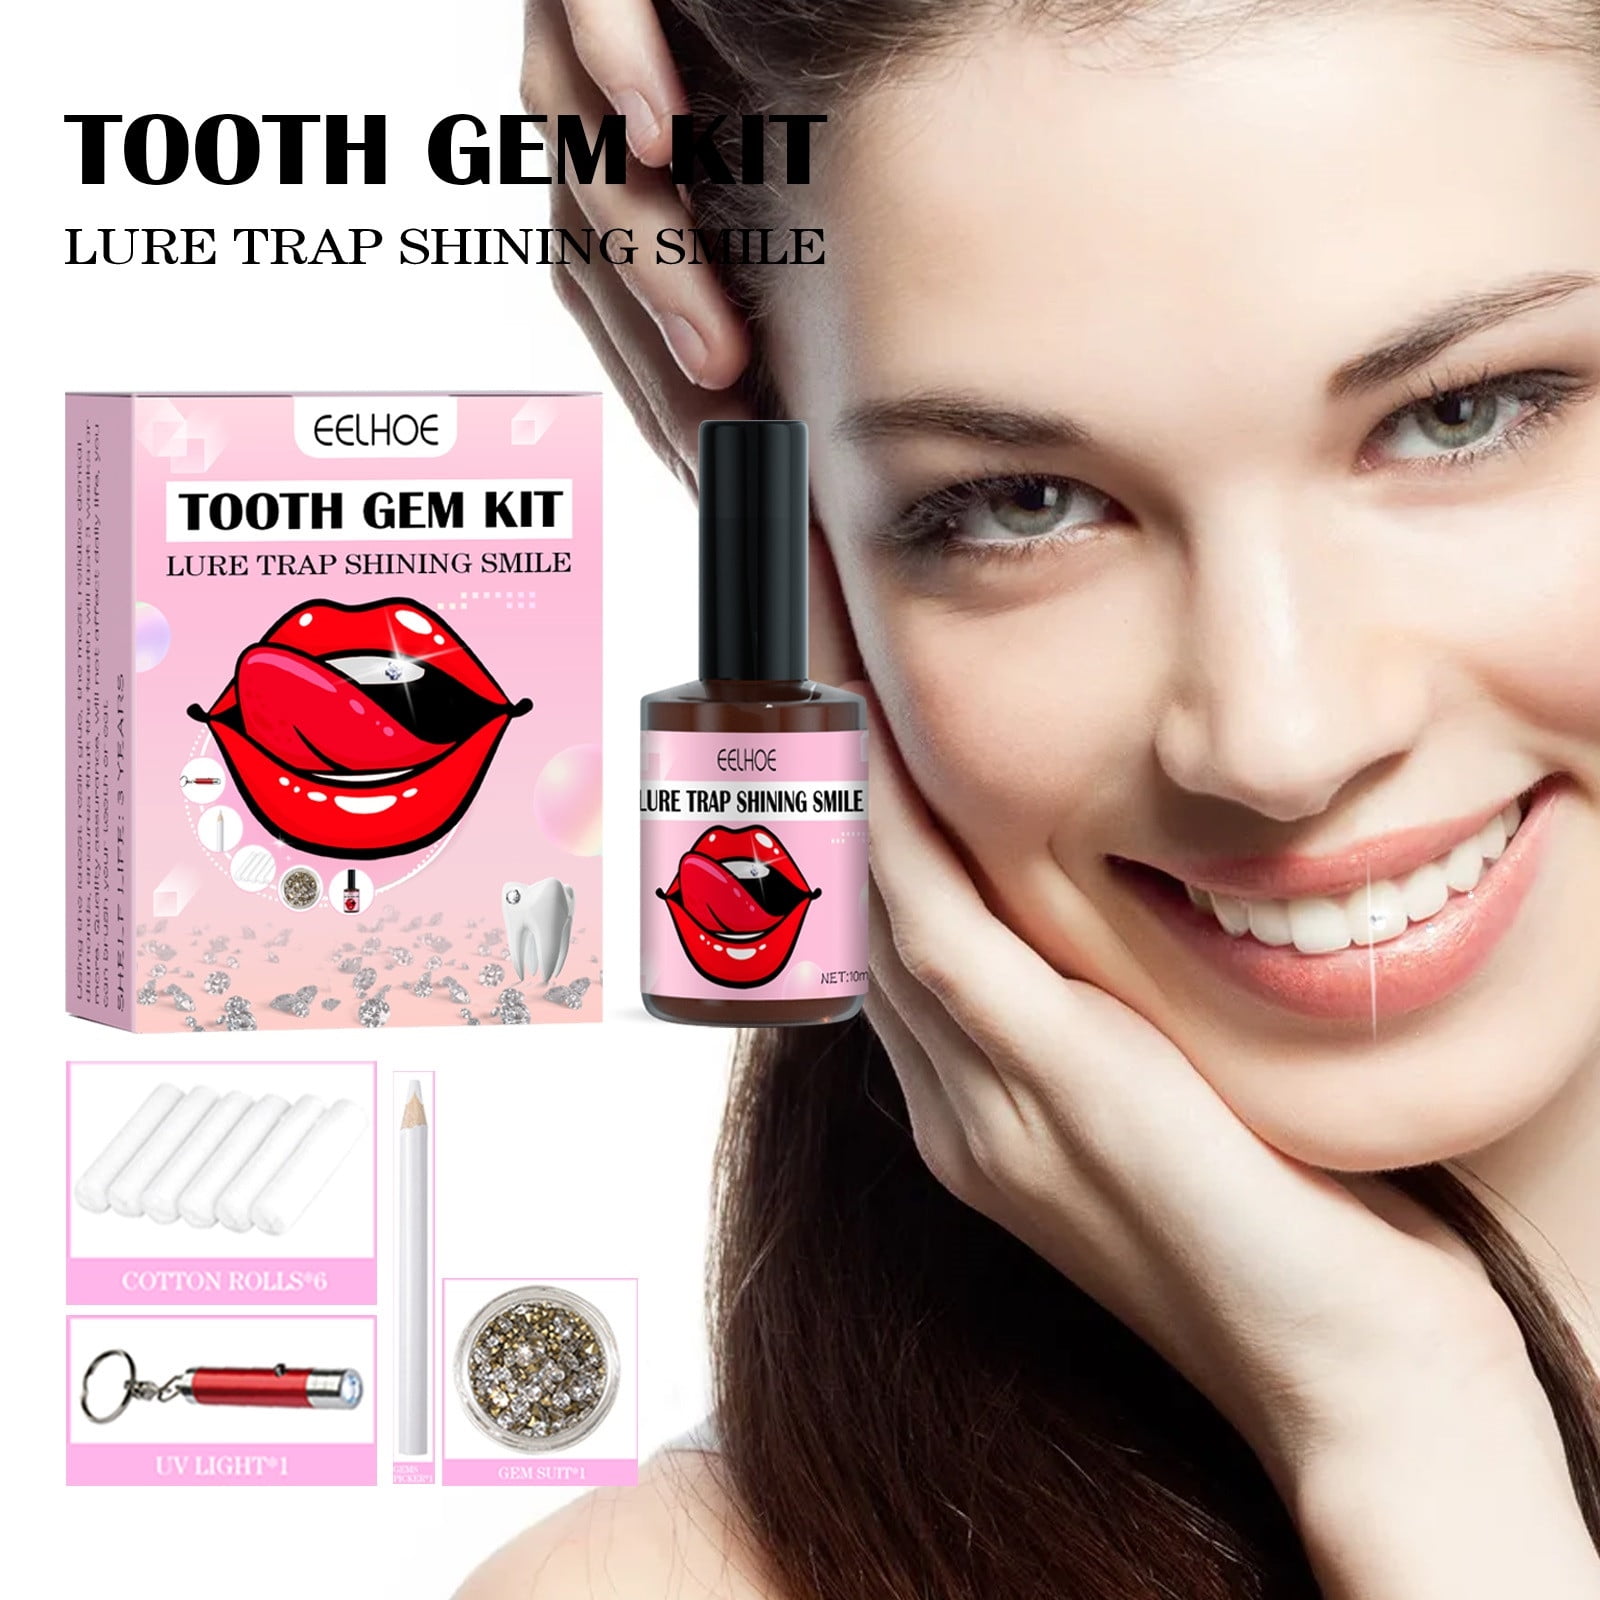 For US, Tooth Gem Kit for Teeth, DIY Crystals Jewelry Kit Teeth Gems Kit  with Glue and Light, Professional Fashionable Tooth Crystal Kit for Teeth, Teeth  Jewelry Starter kit $19.99 Dm Me